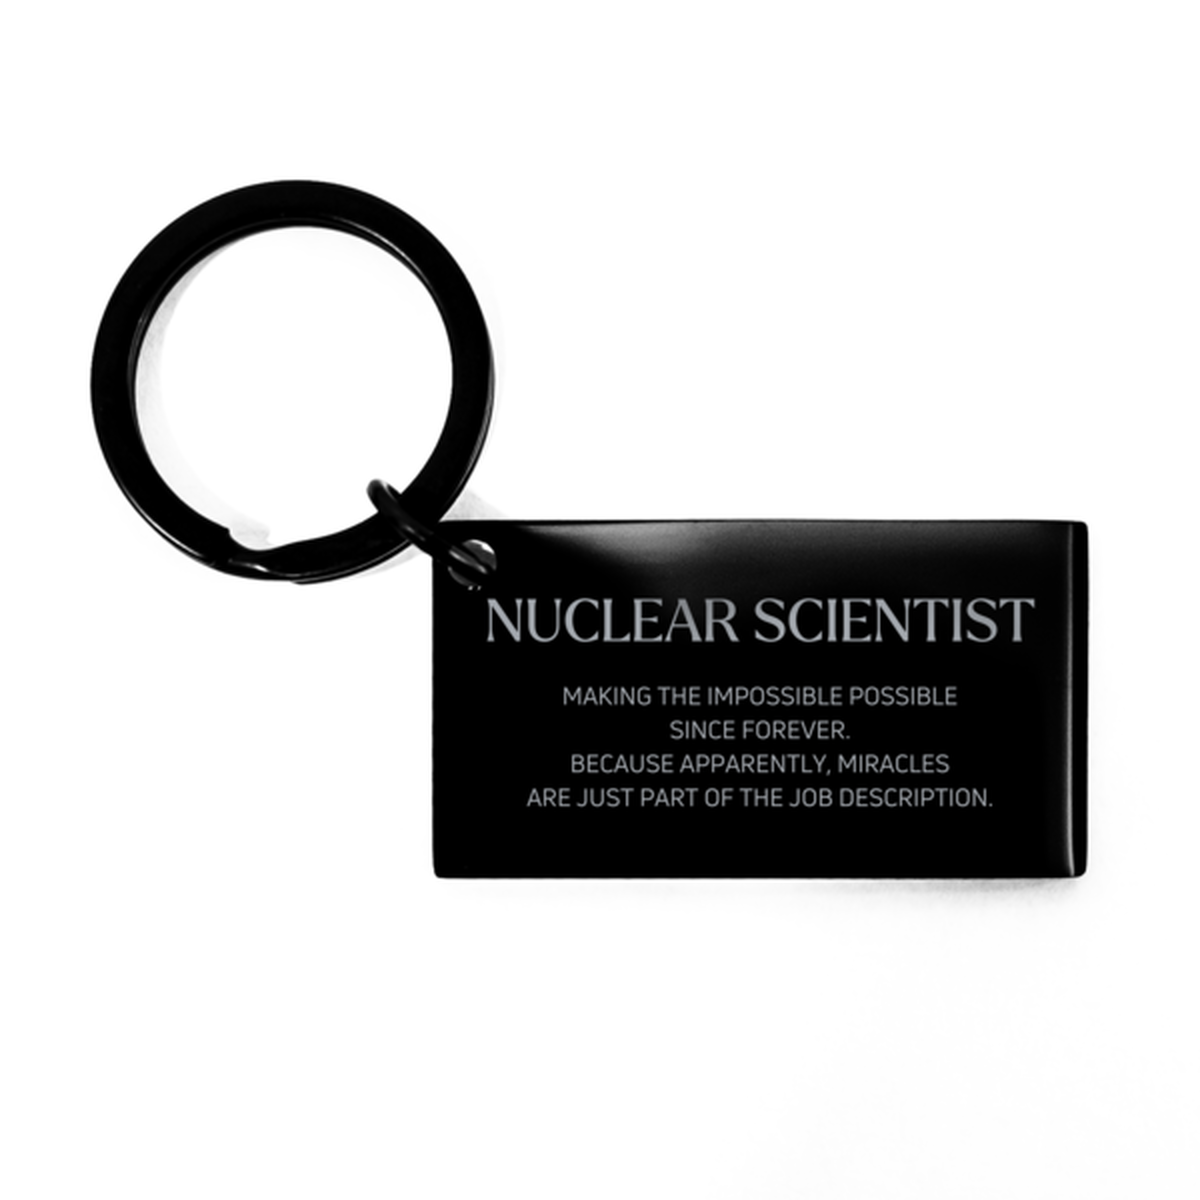 Funny Nuclear Scientist Gifts, Miracles are just part of the job description, Inspirational Birthday Keychain For Nuclear Scientist, Men, Women, Coworkers, Friends, Boss